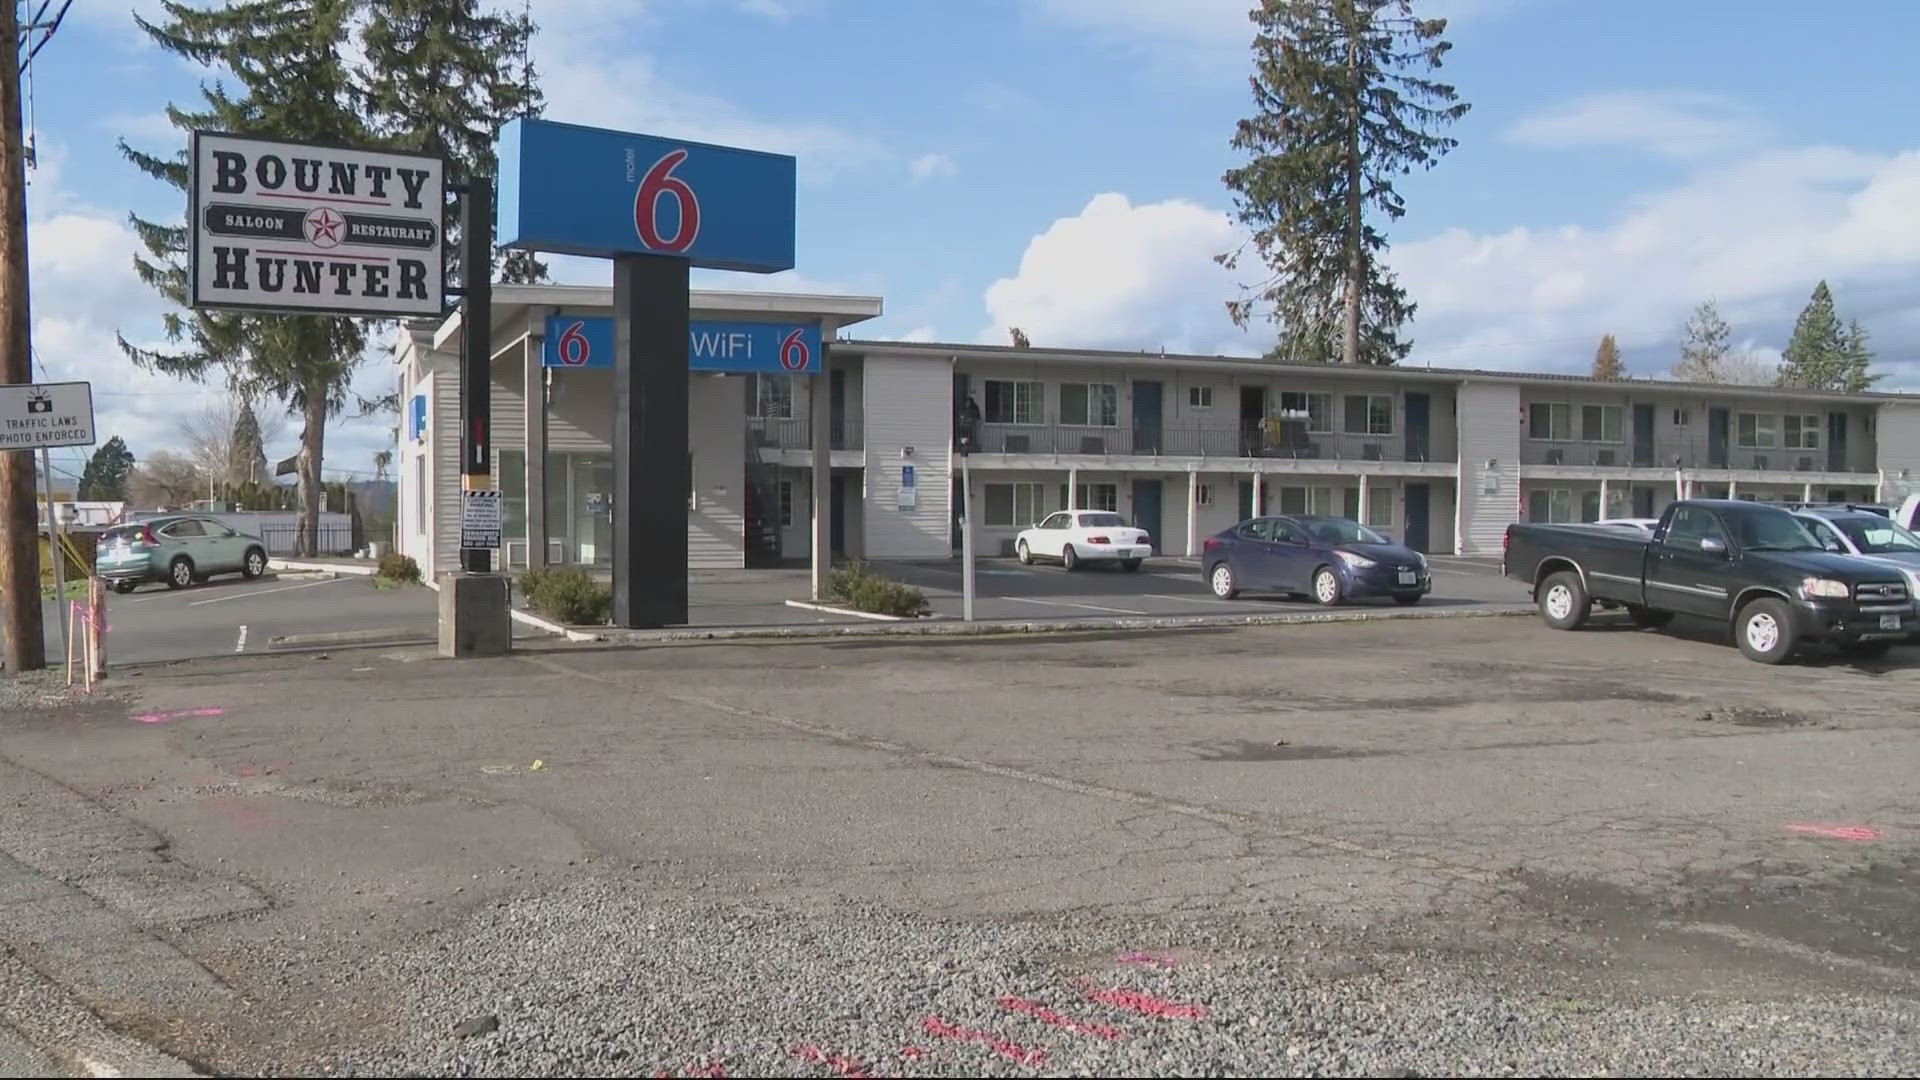 Four drug traffickers were caught transporting 370 gallons of liquid heroin at a Motel 6 in Tigard on Jan. 24.